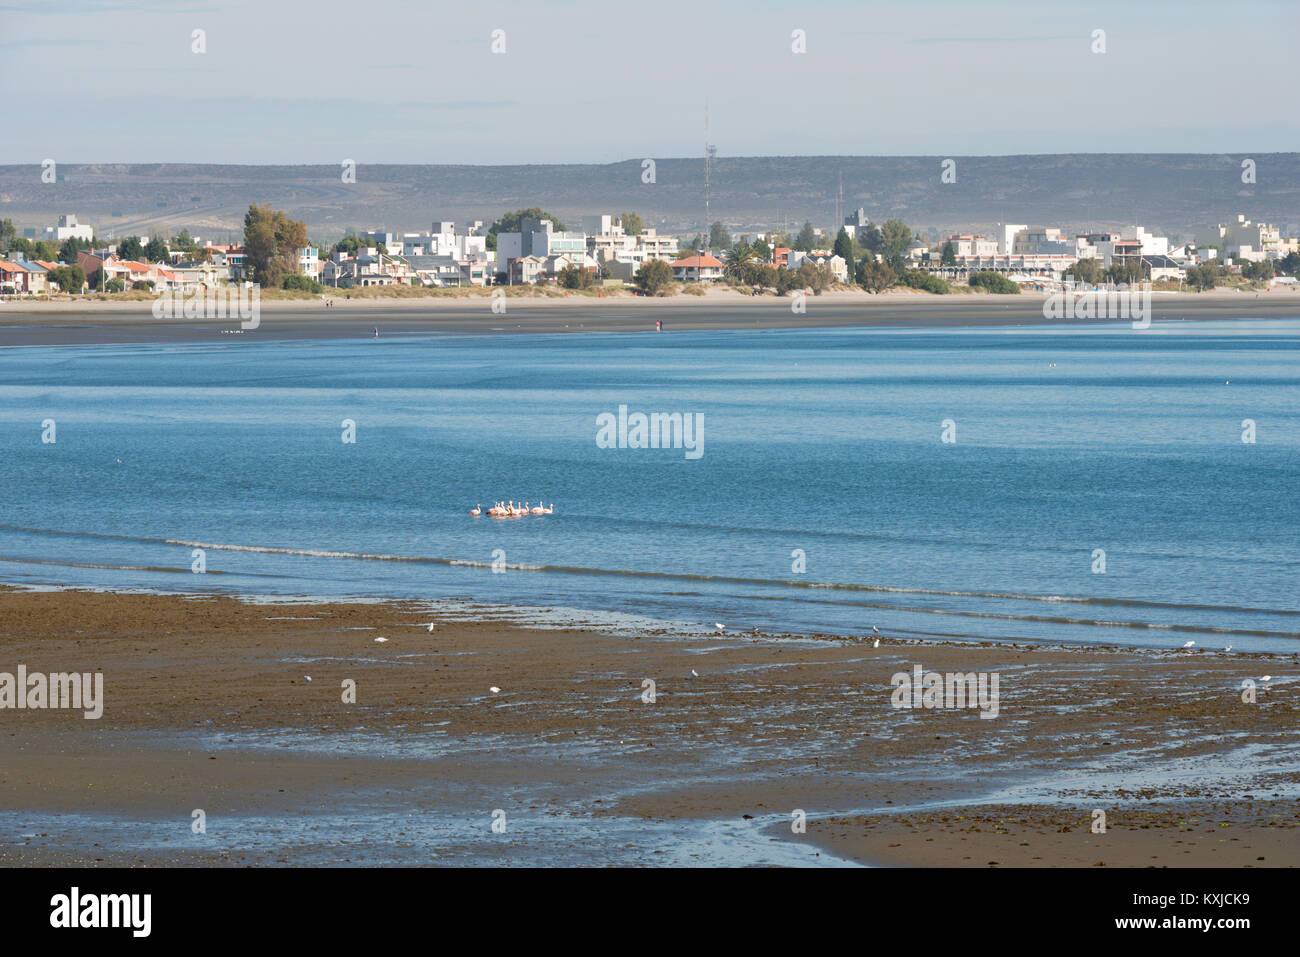 a distant view of Puerto Madryn, Argentina Stock Photo